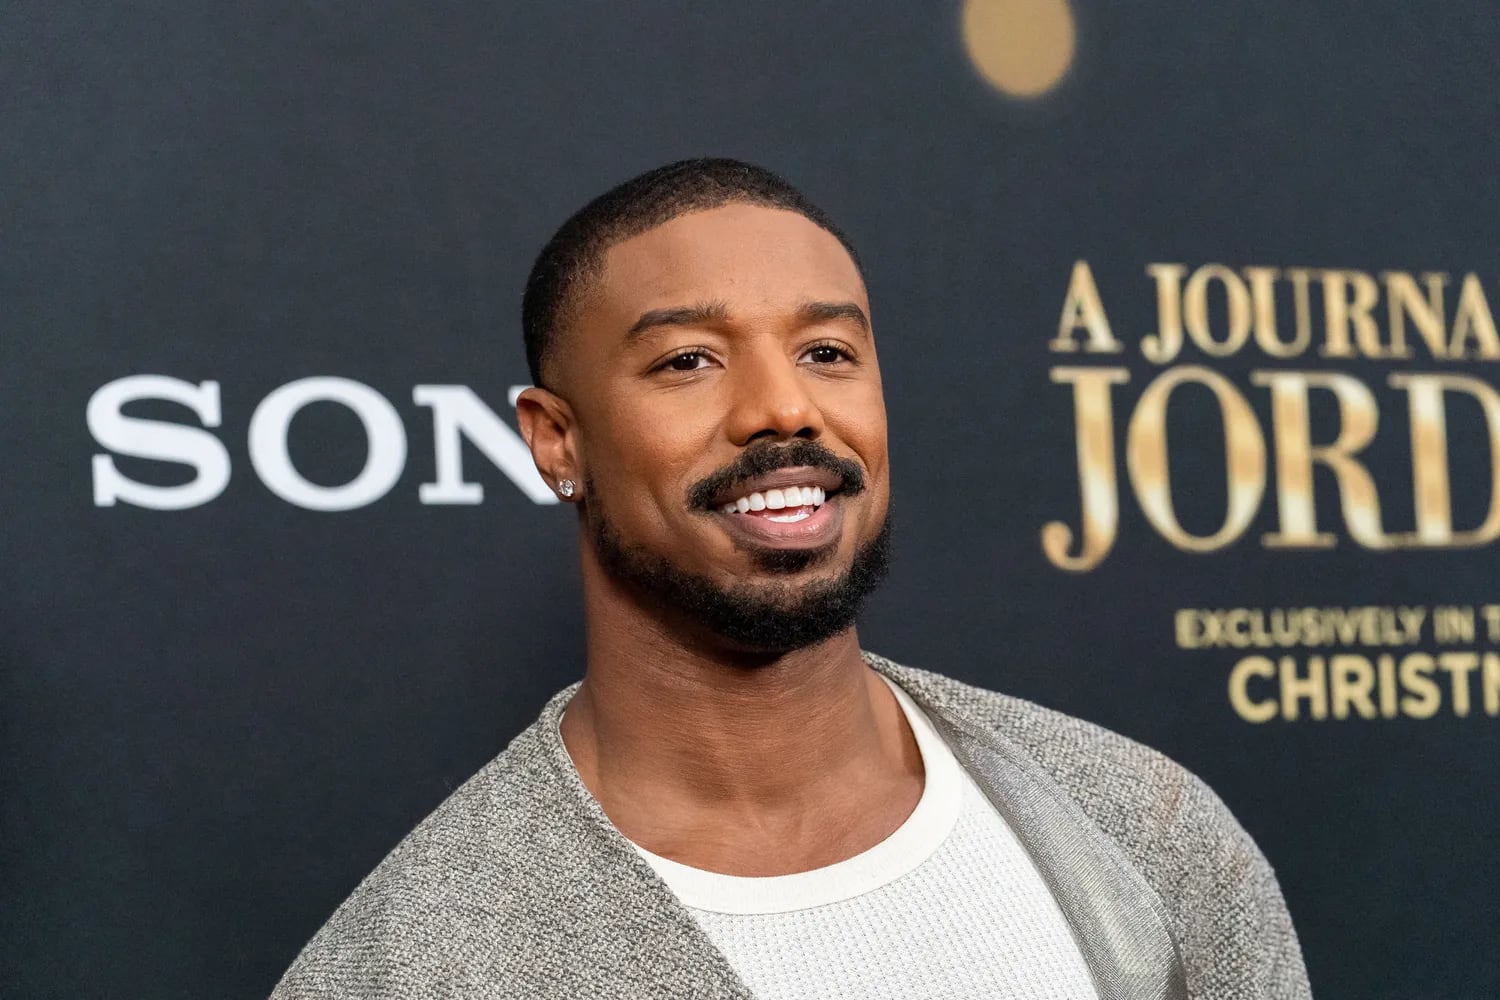 Michael B. Jordan knows how to play Hollywood's game - The Globe and Mail